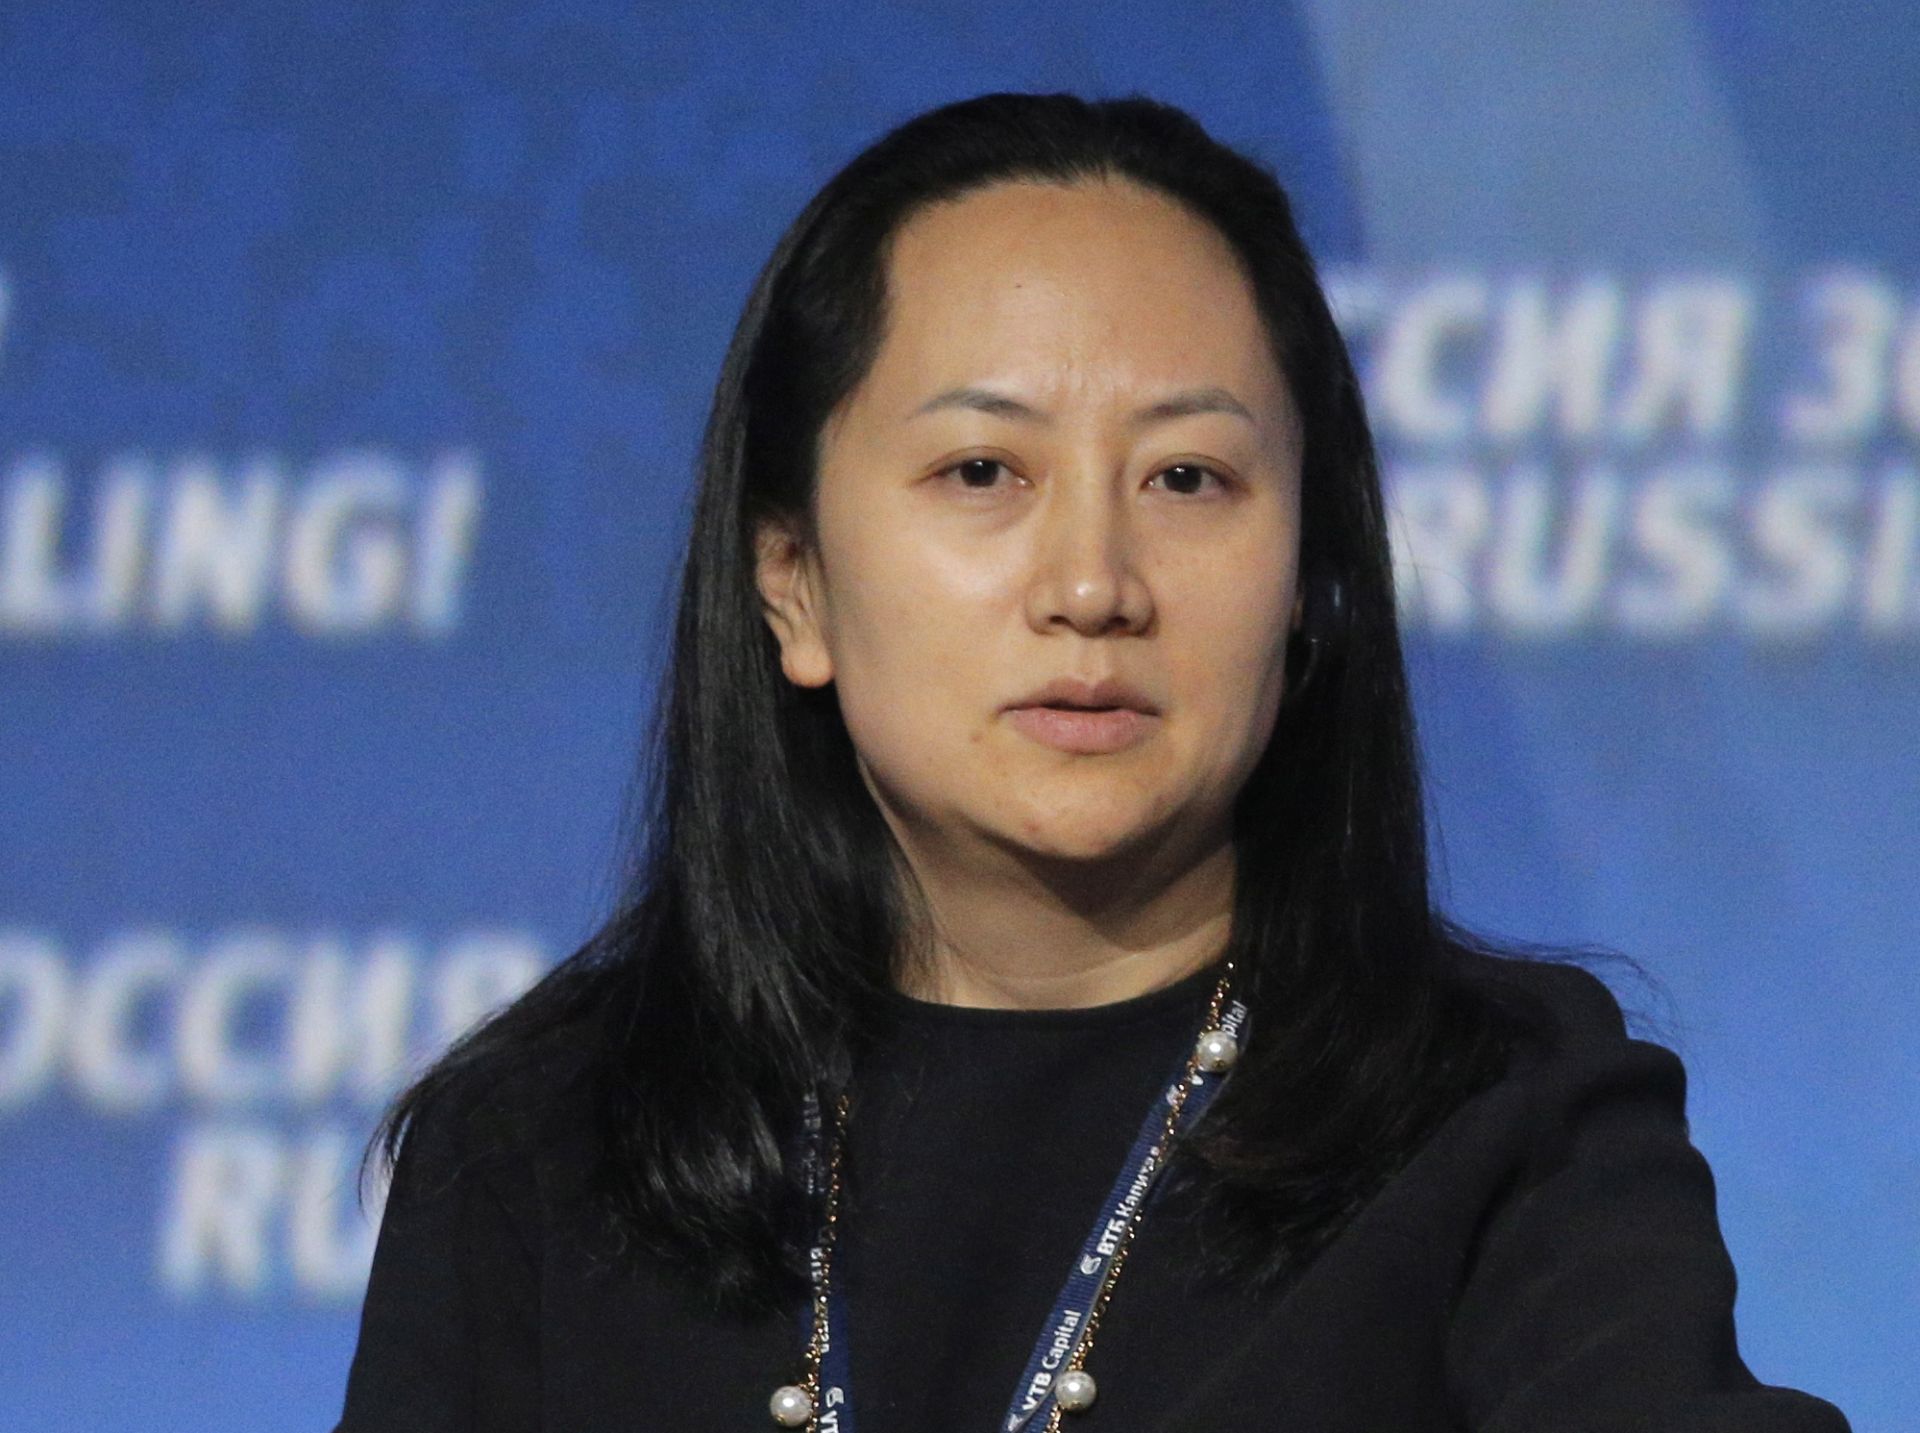 epa07211367 (FILE) - Meng Wanzhou, Chief Financial Officer of Huawei, attends the VTB Capital's 'RUSSIA CALLING' investment forum in Moscow, Russia, 02 October 2014 (reissued 06 December 2018). Meng Wanzhou has been arrested in Canada at the request of US authorities. According to US media reports, Meng Wanzhou was detained for potential US sanction violations.  EPA/MAXIM SHIPENKOV